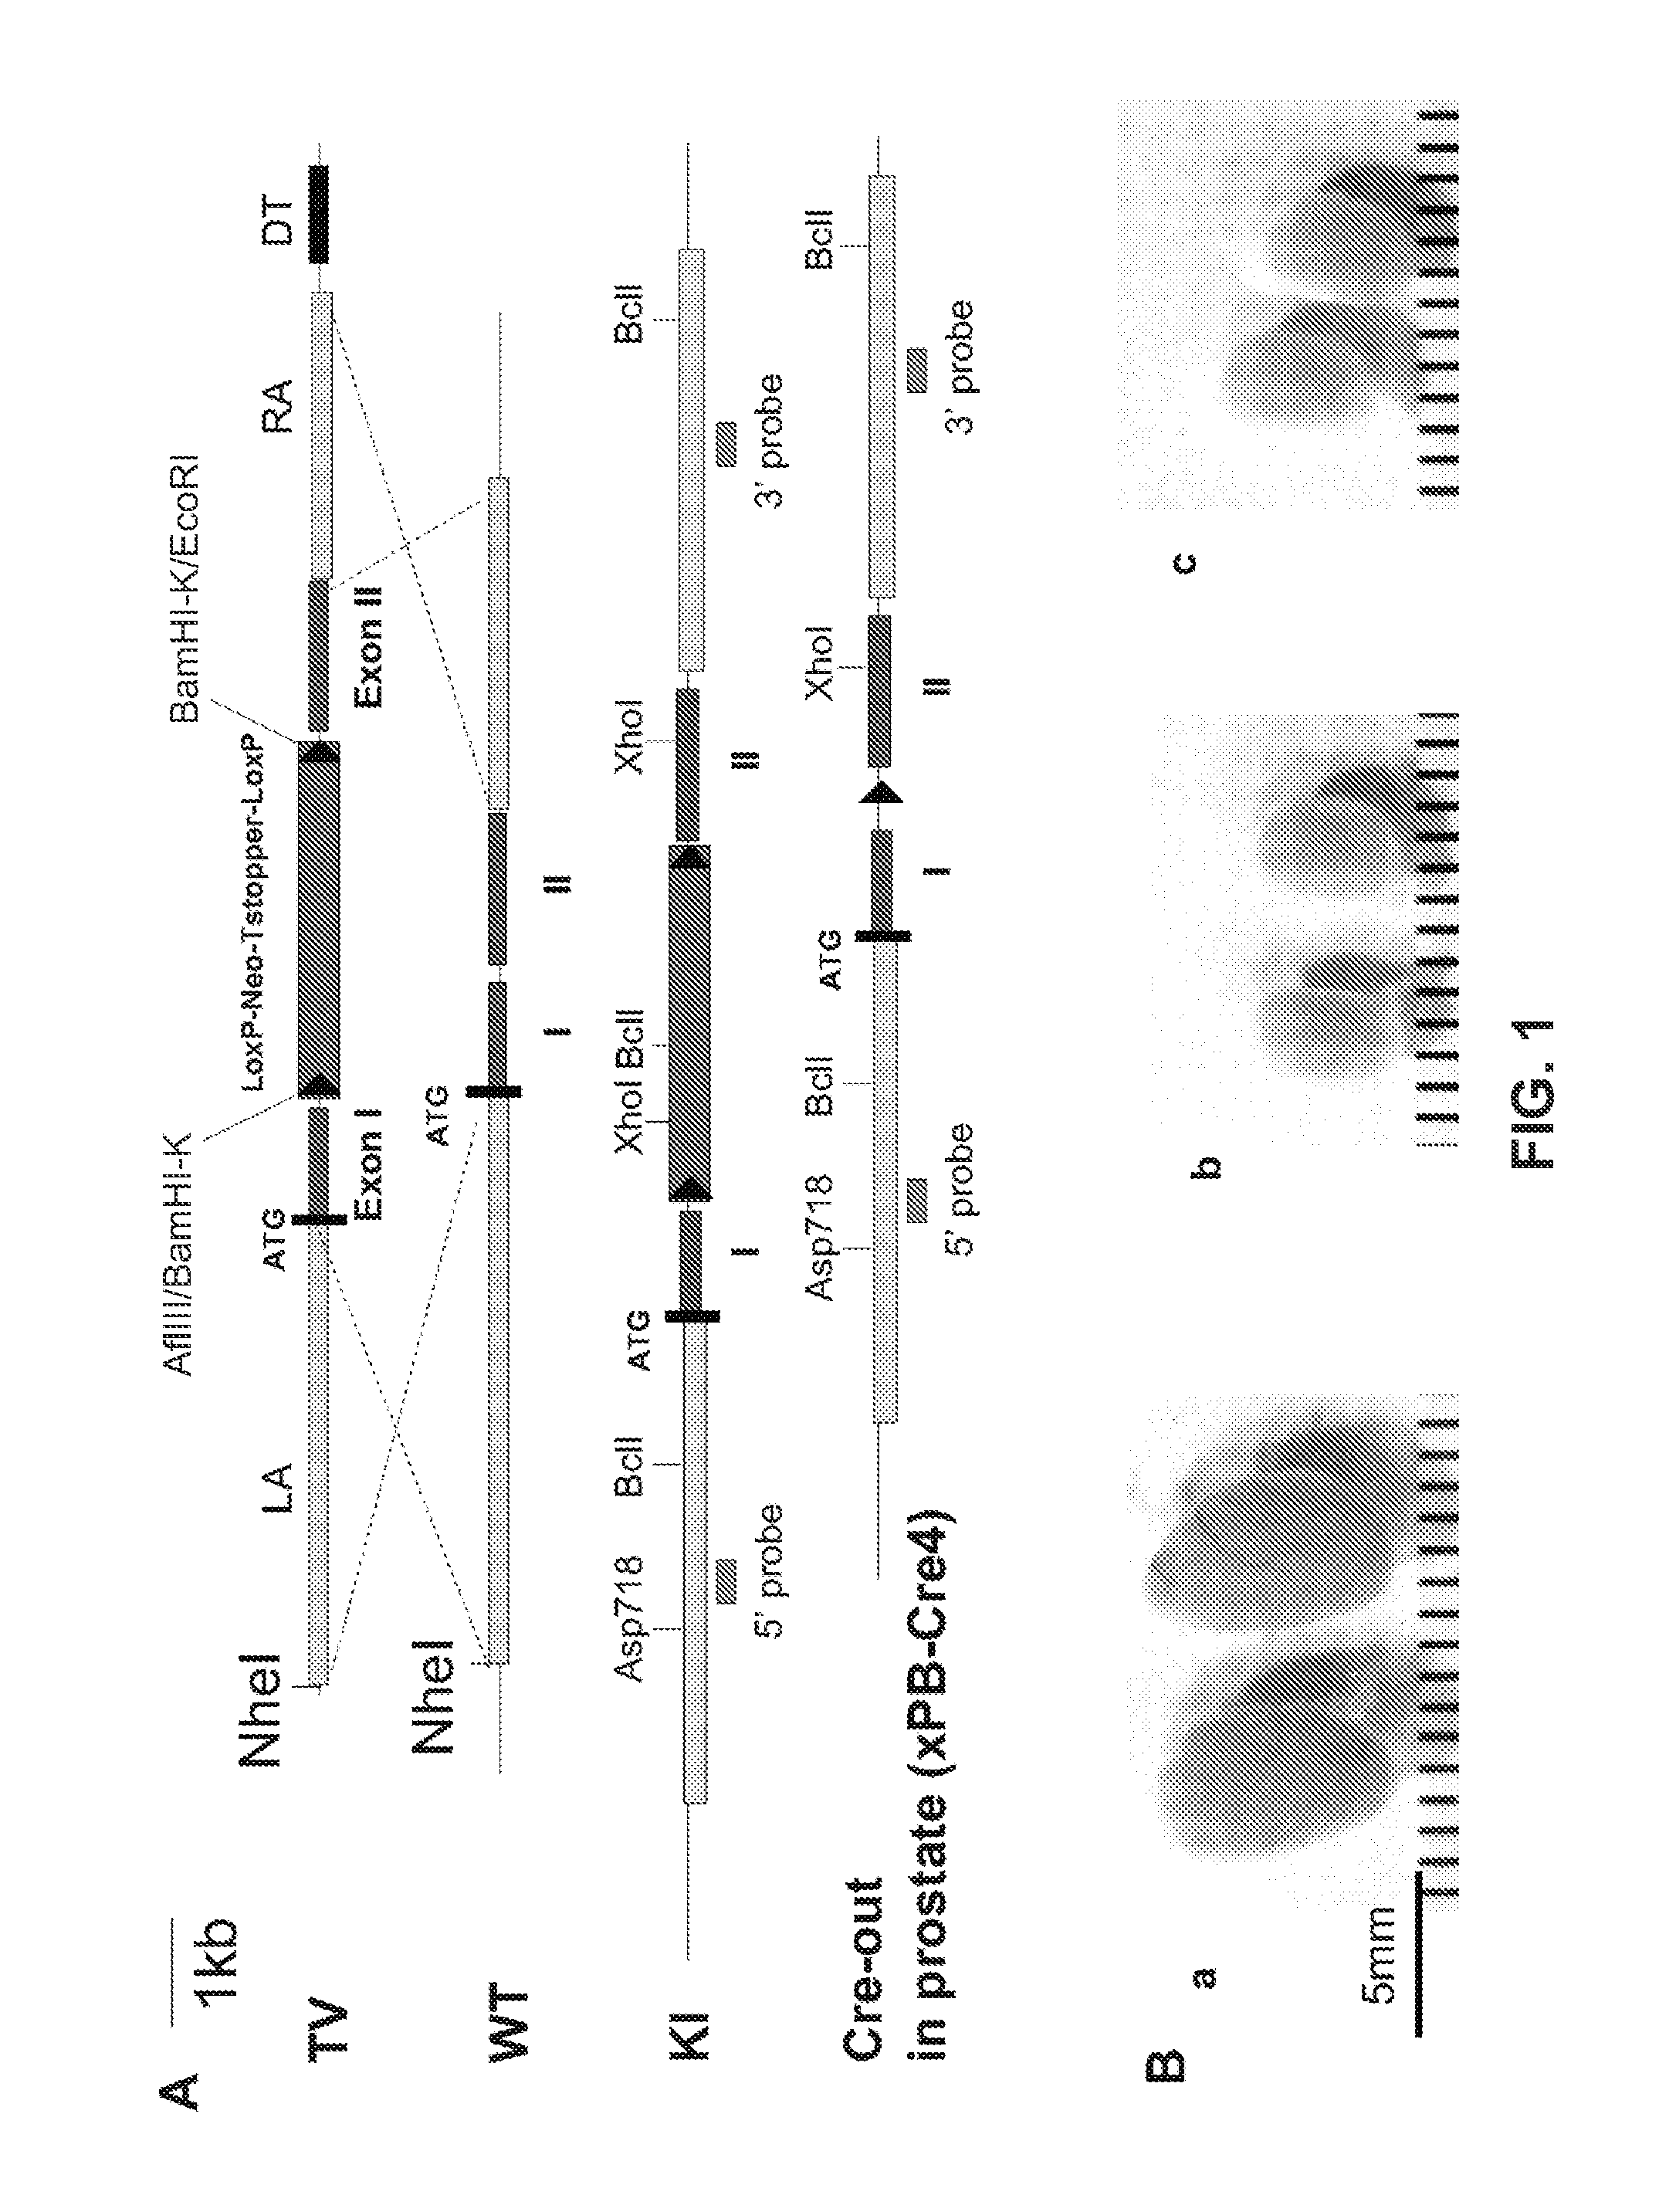 Signatures and determinants associated with prostate cancer progression and methods of use thereof